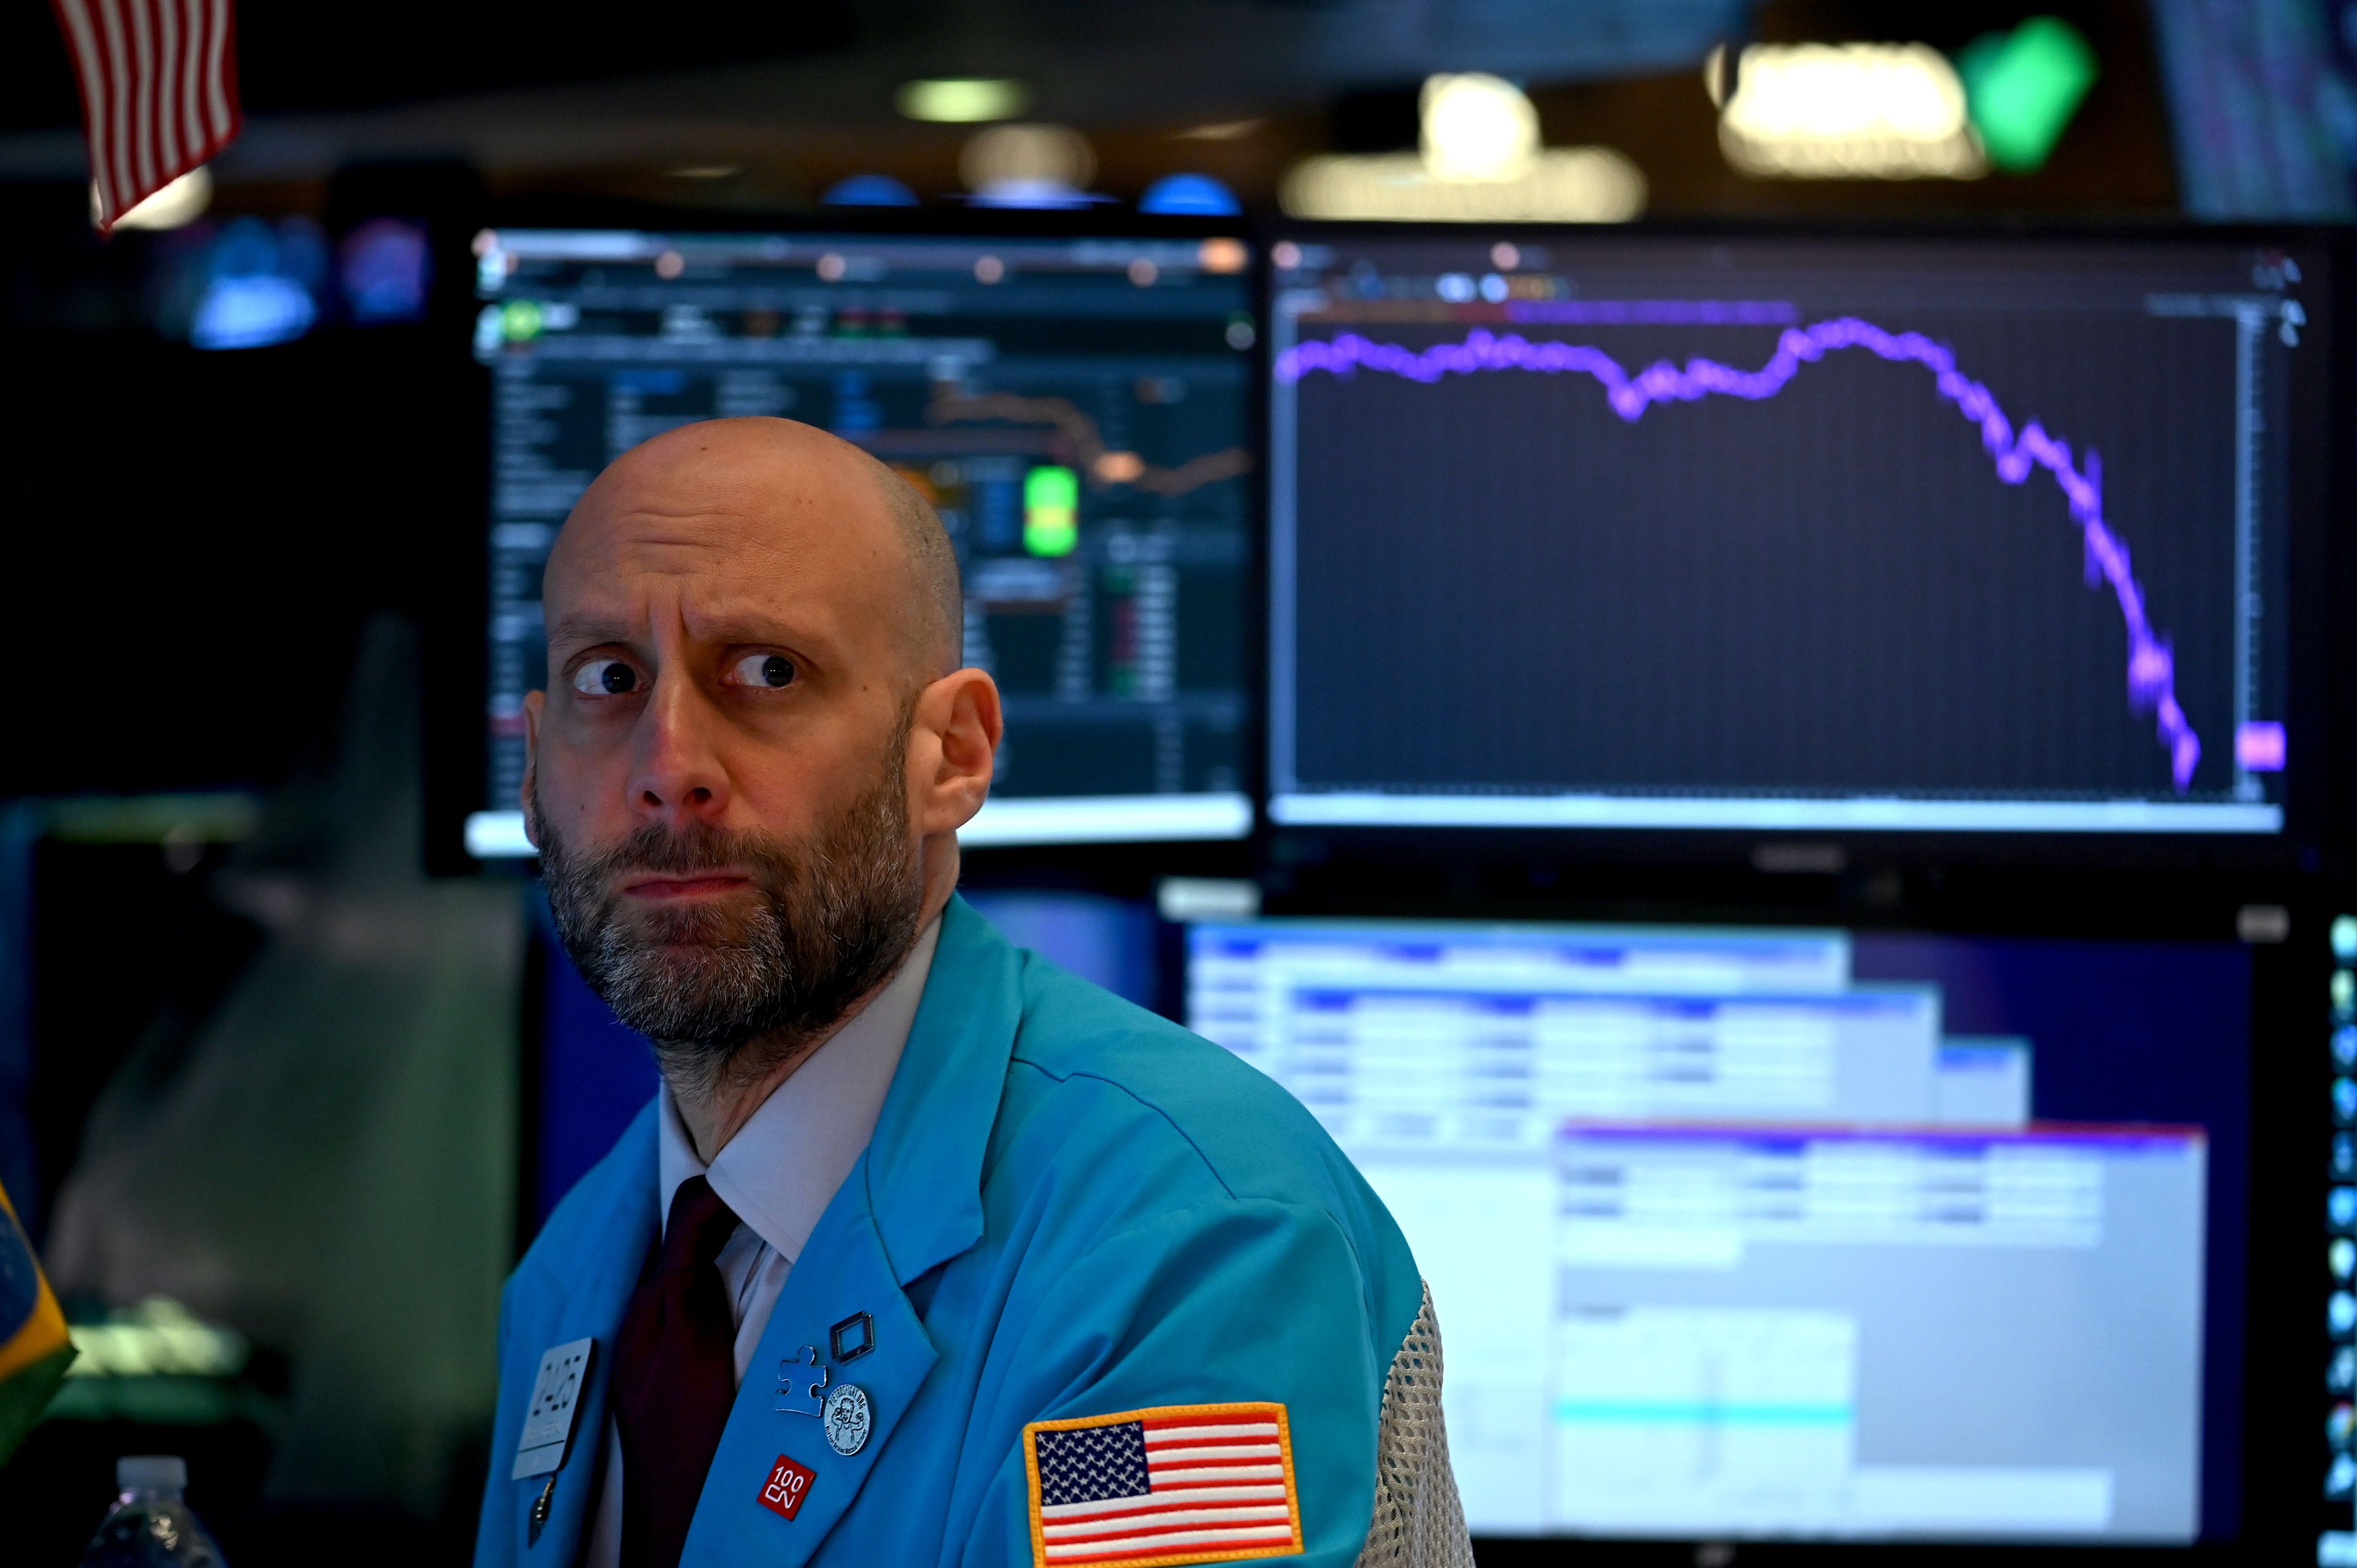 Traders work during the closing bell at the New York Stock Exchange on March 17, 2020 in New York City. The coronavirus has led to financial uncertainty, including job losses and business closures, across the globe. (Johannes Eisele—AFP/Getty Images)